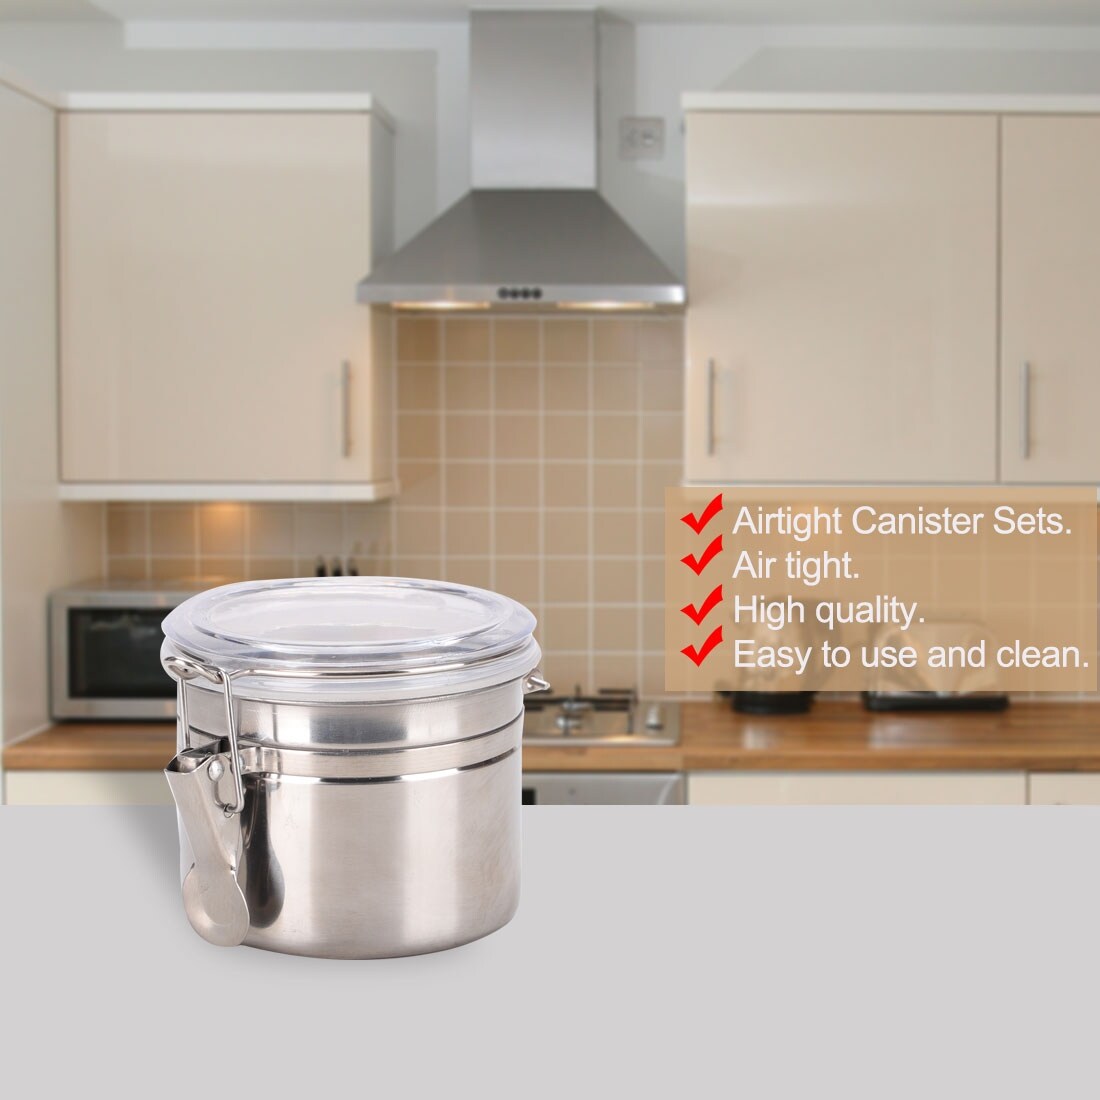 https://ak1.ostkcdn.com/images/products/is/images/direct/4bef40289e1cee373d6e5b321acdb563ad22982c/Stainless-Steel-Airtight-Canister-Food-Container.jpg